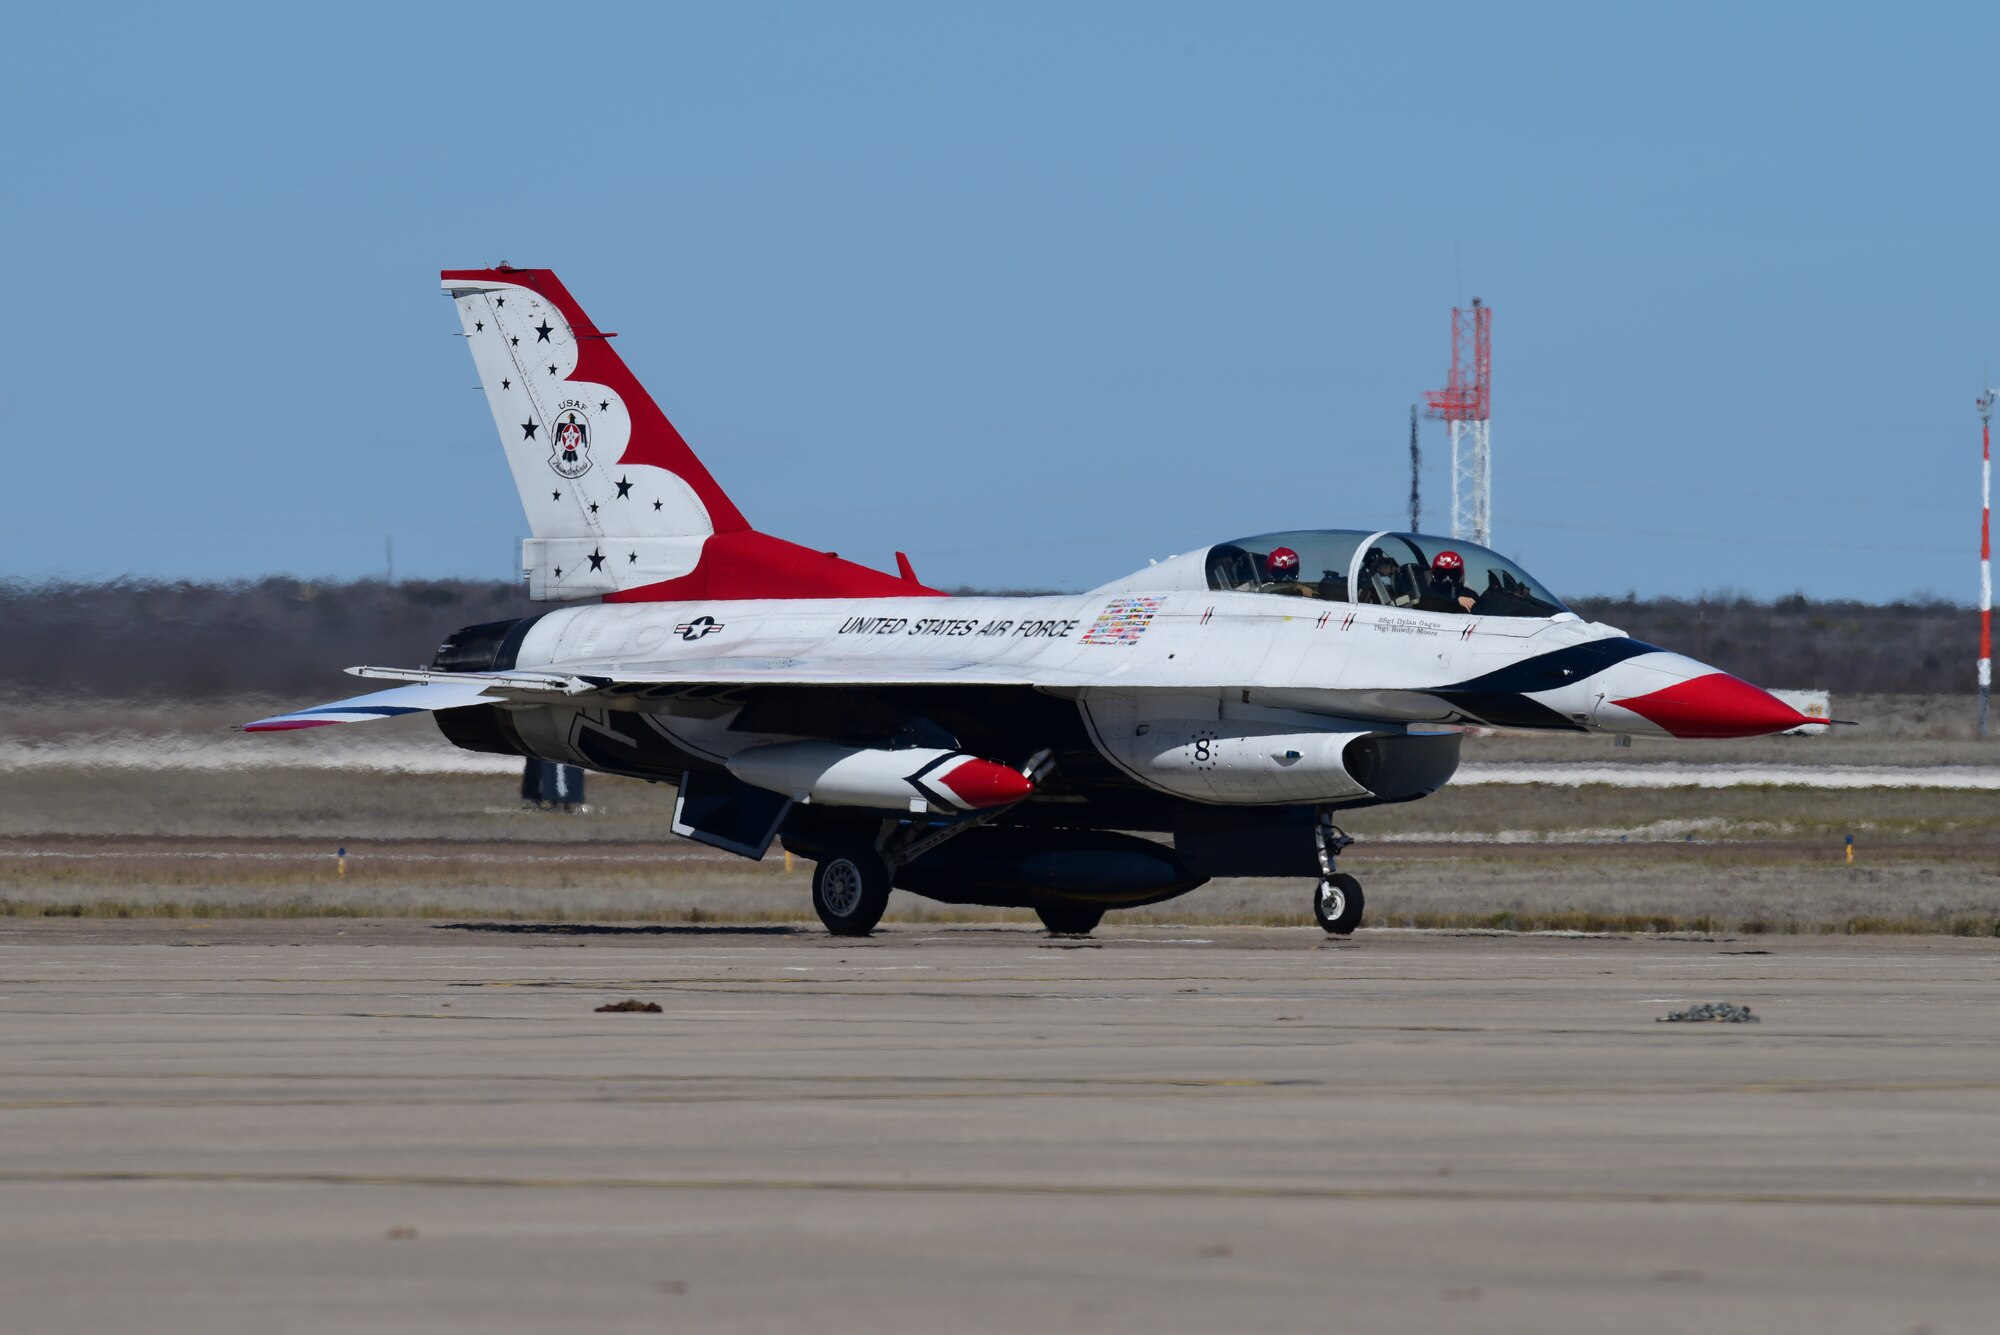 Maj. Jason Markzon, U.S. Air Force Aerial Demonstration Squadron, also known as the “Thunderbirds”, taxis on the flightline at Laughlin Air Force Base, Texas on 23 Jan. 2020. Markzon visited Del Rio and Laughlin Air Force Base as part of the U.S. Air Force "Thunderbirds" advanced site survey to prepare for the 2020 'Fiesta of Flight' air & space expo on 14 March 2020. (U.S. Air Force photo by Senior Airman John A. Crawford)